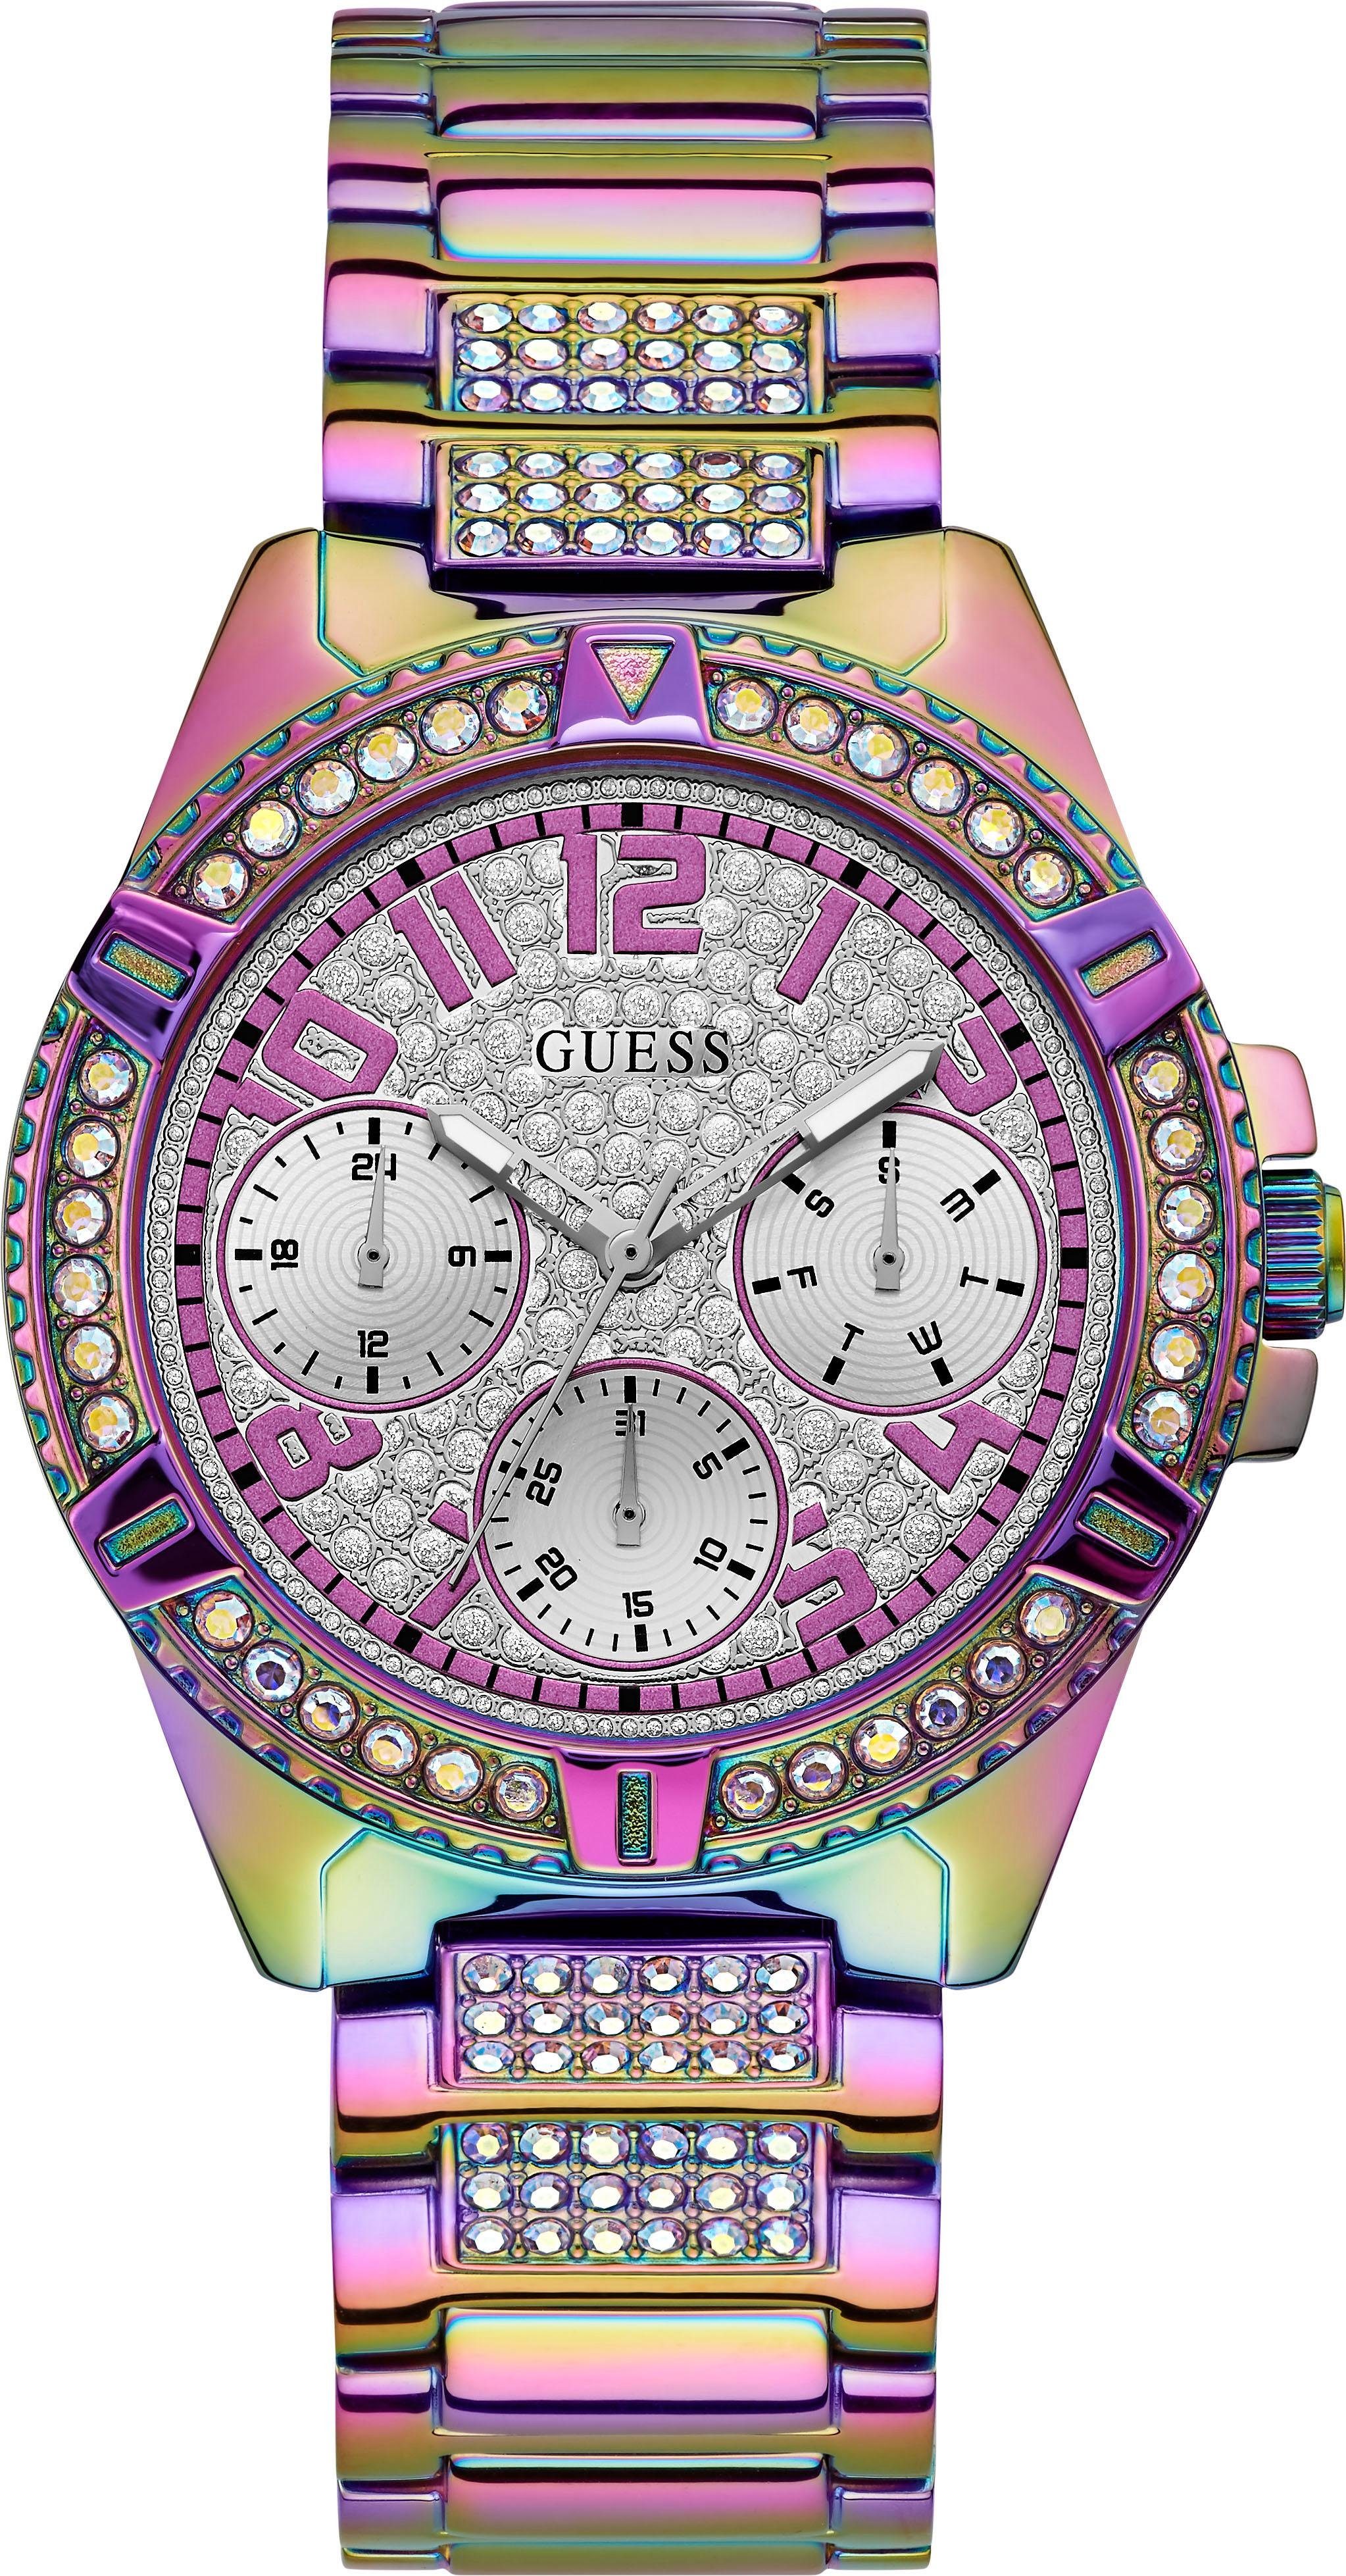 Guess Multifunktionsuhr »LADY FRONTIER, GW0044L1« | OTTO